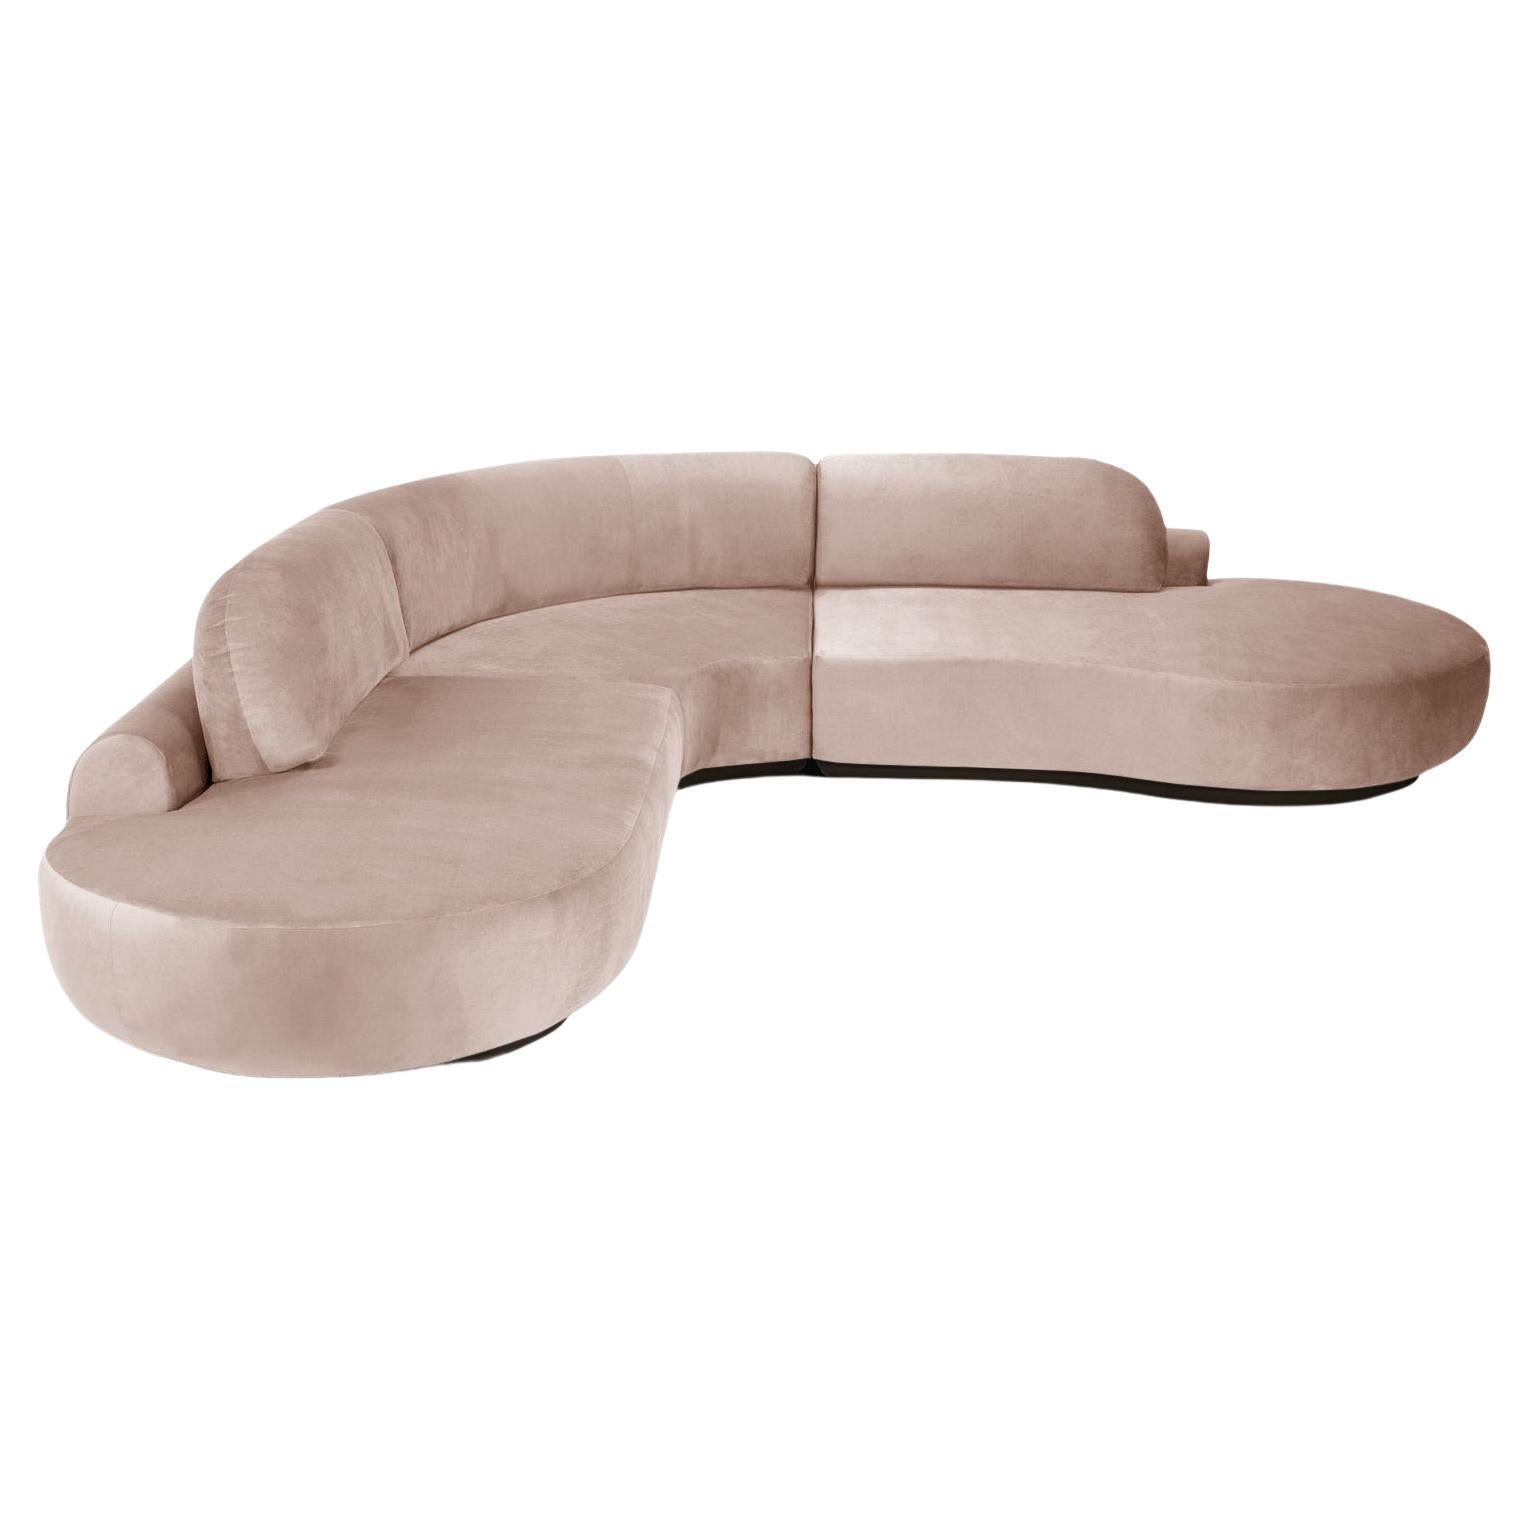 Naked Curved Sectional Sofa, 3 Piece with Beech Ash-056-5 and Vigo Blossom